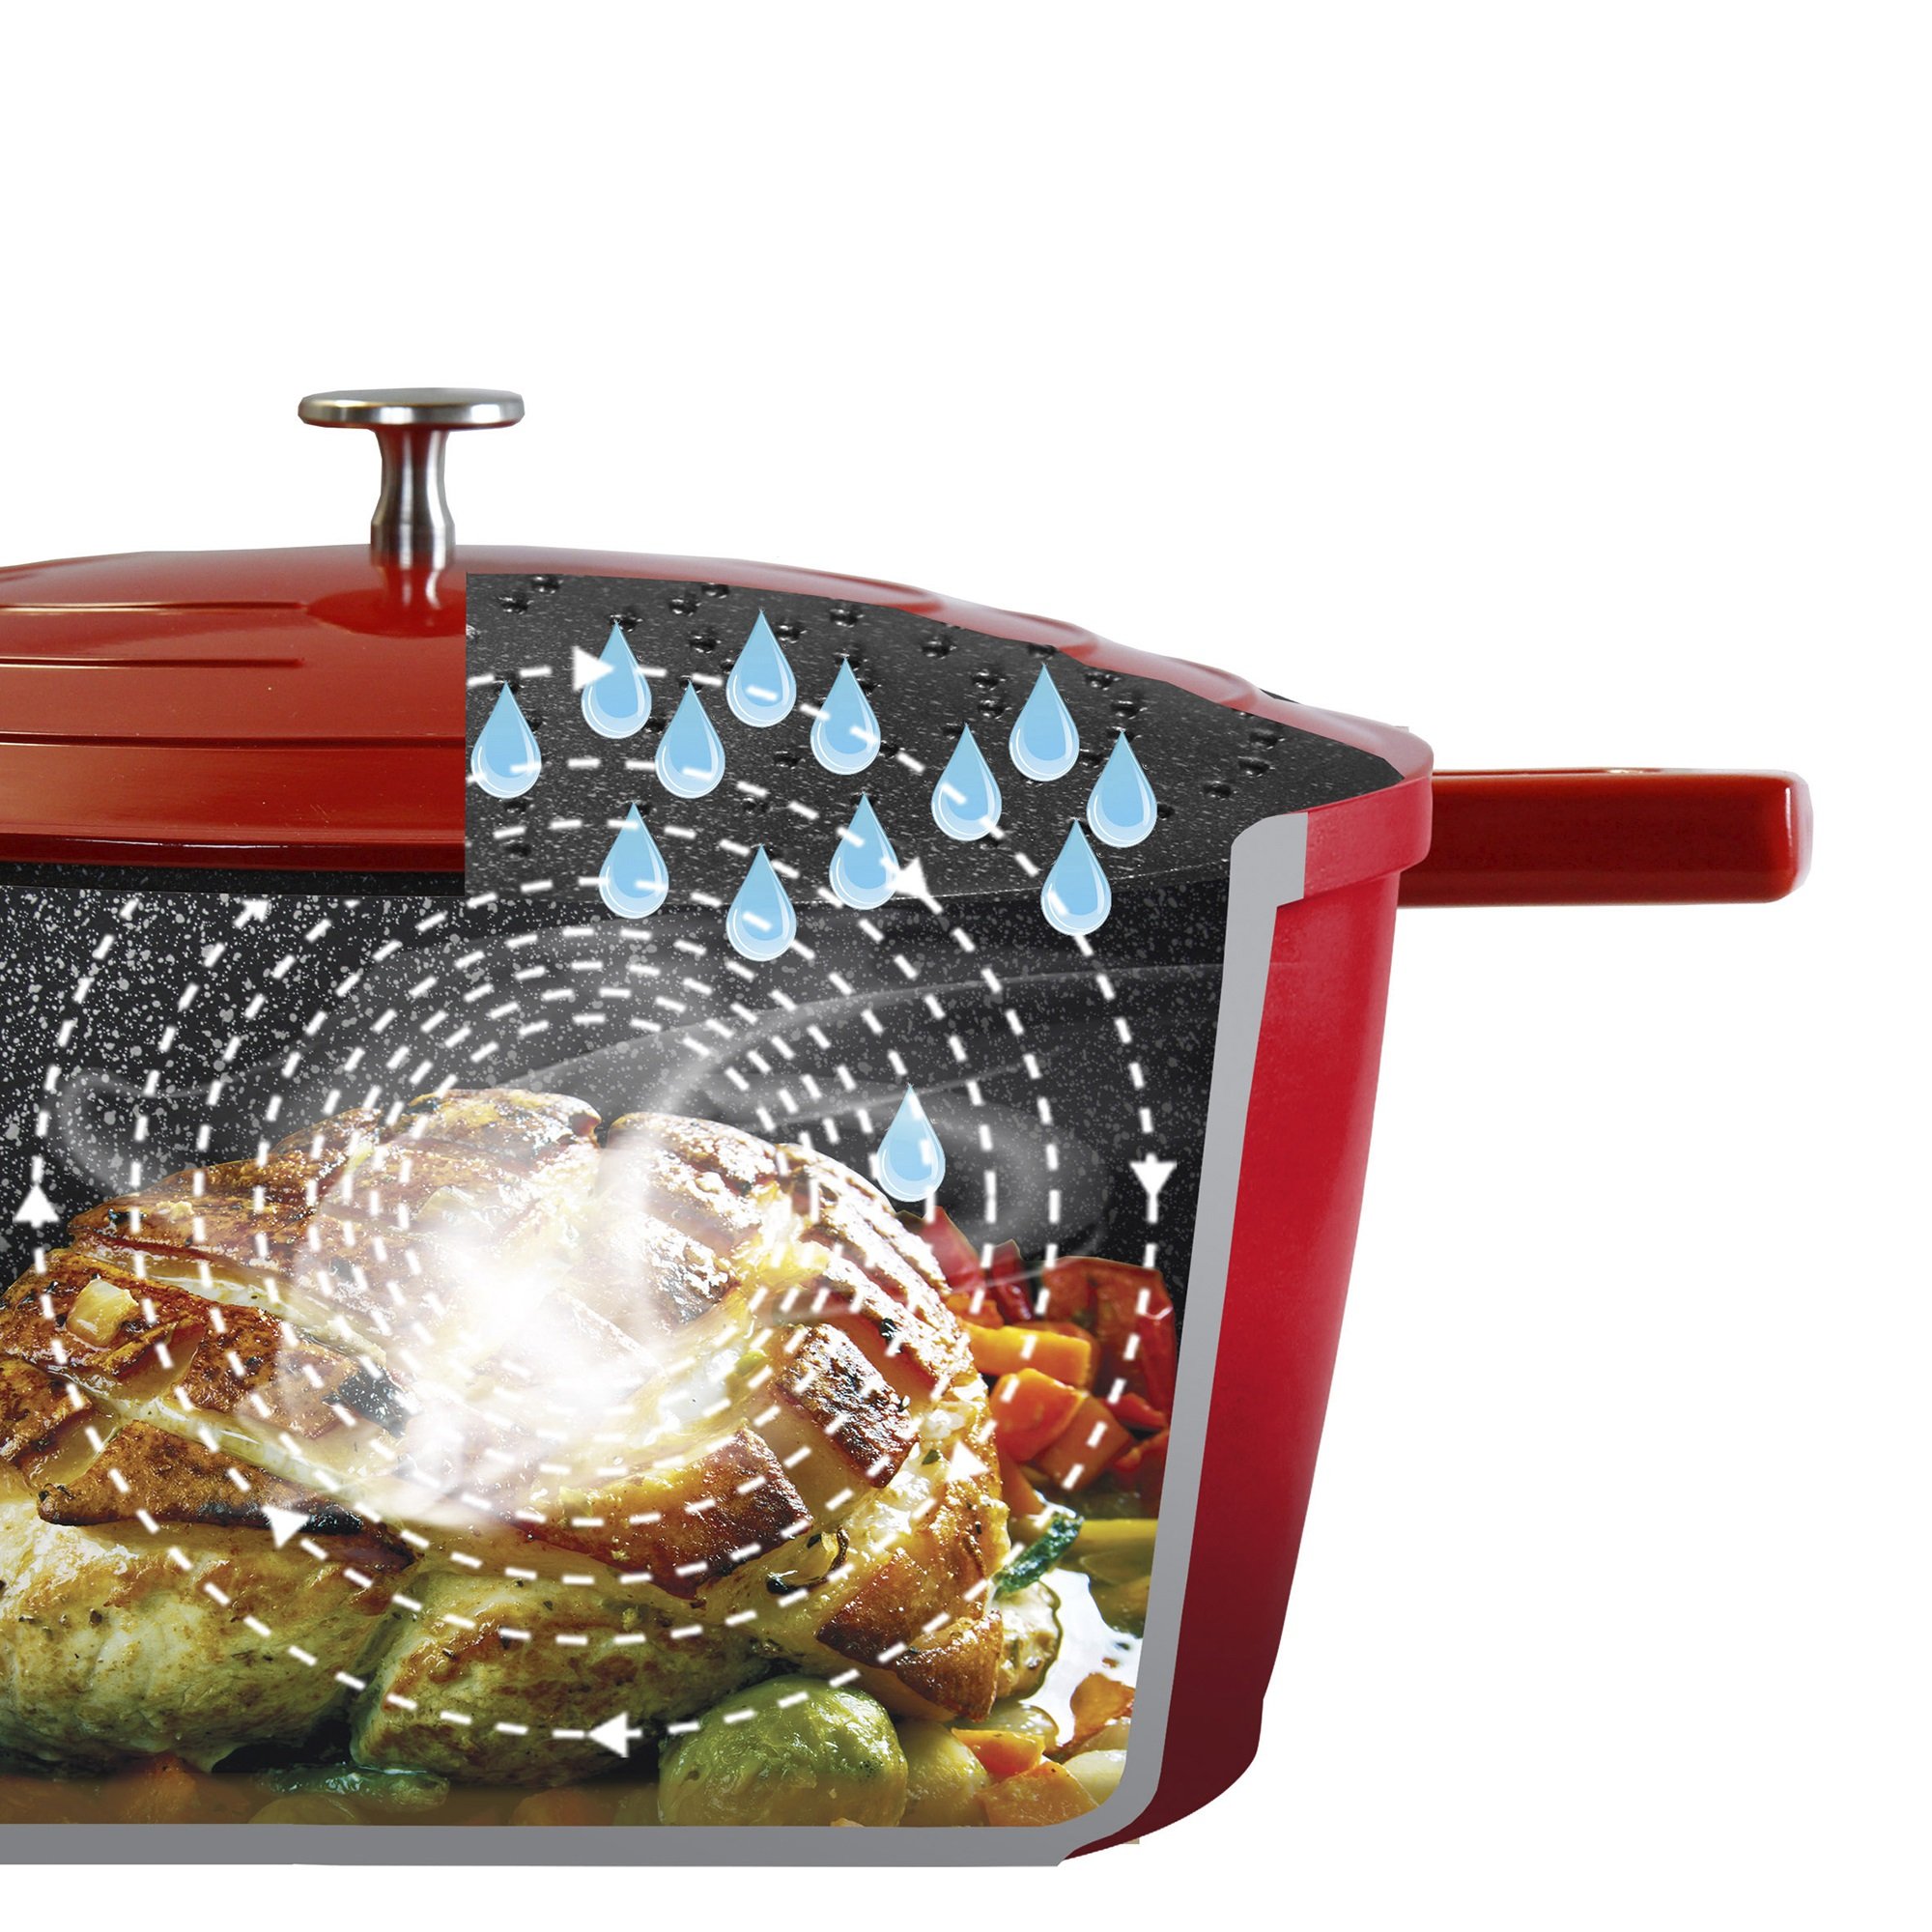 STONELINE® Induction Roaster with Lid 32x25 cm, Casserole Dish, Non-Stick Pot | red